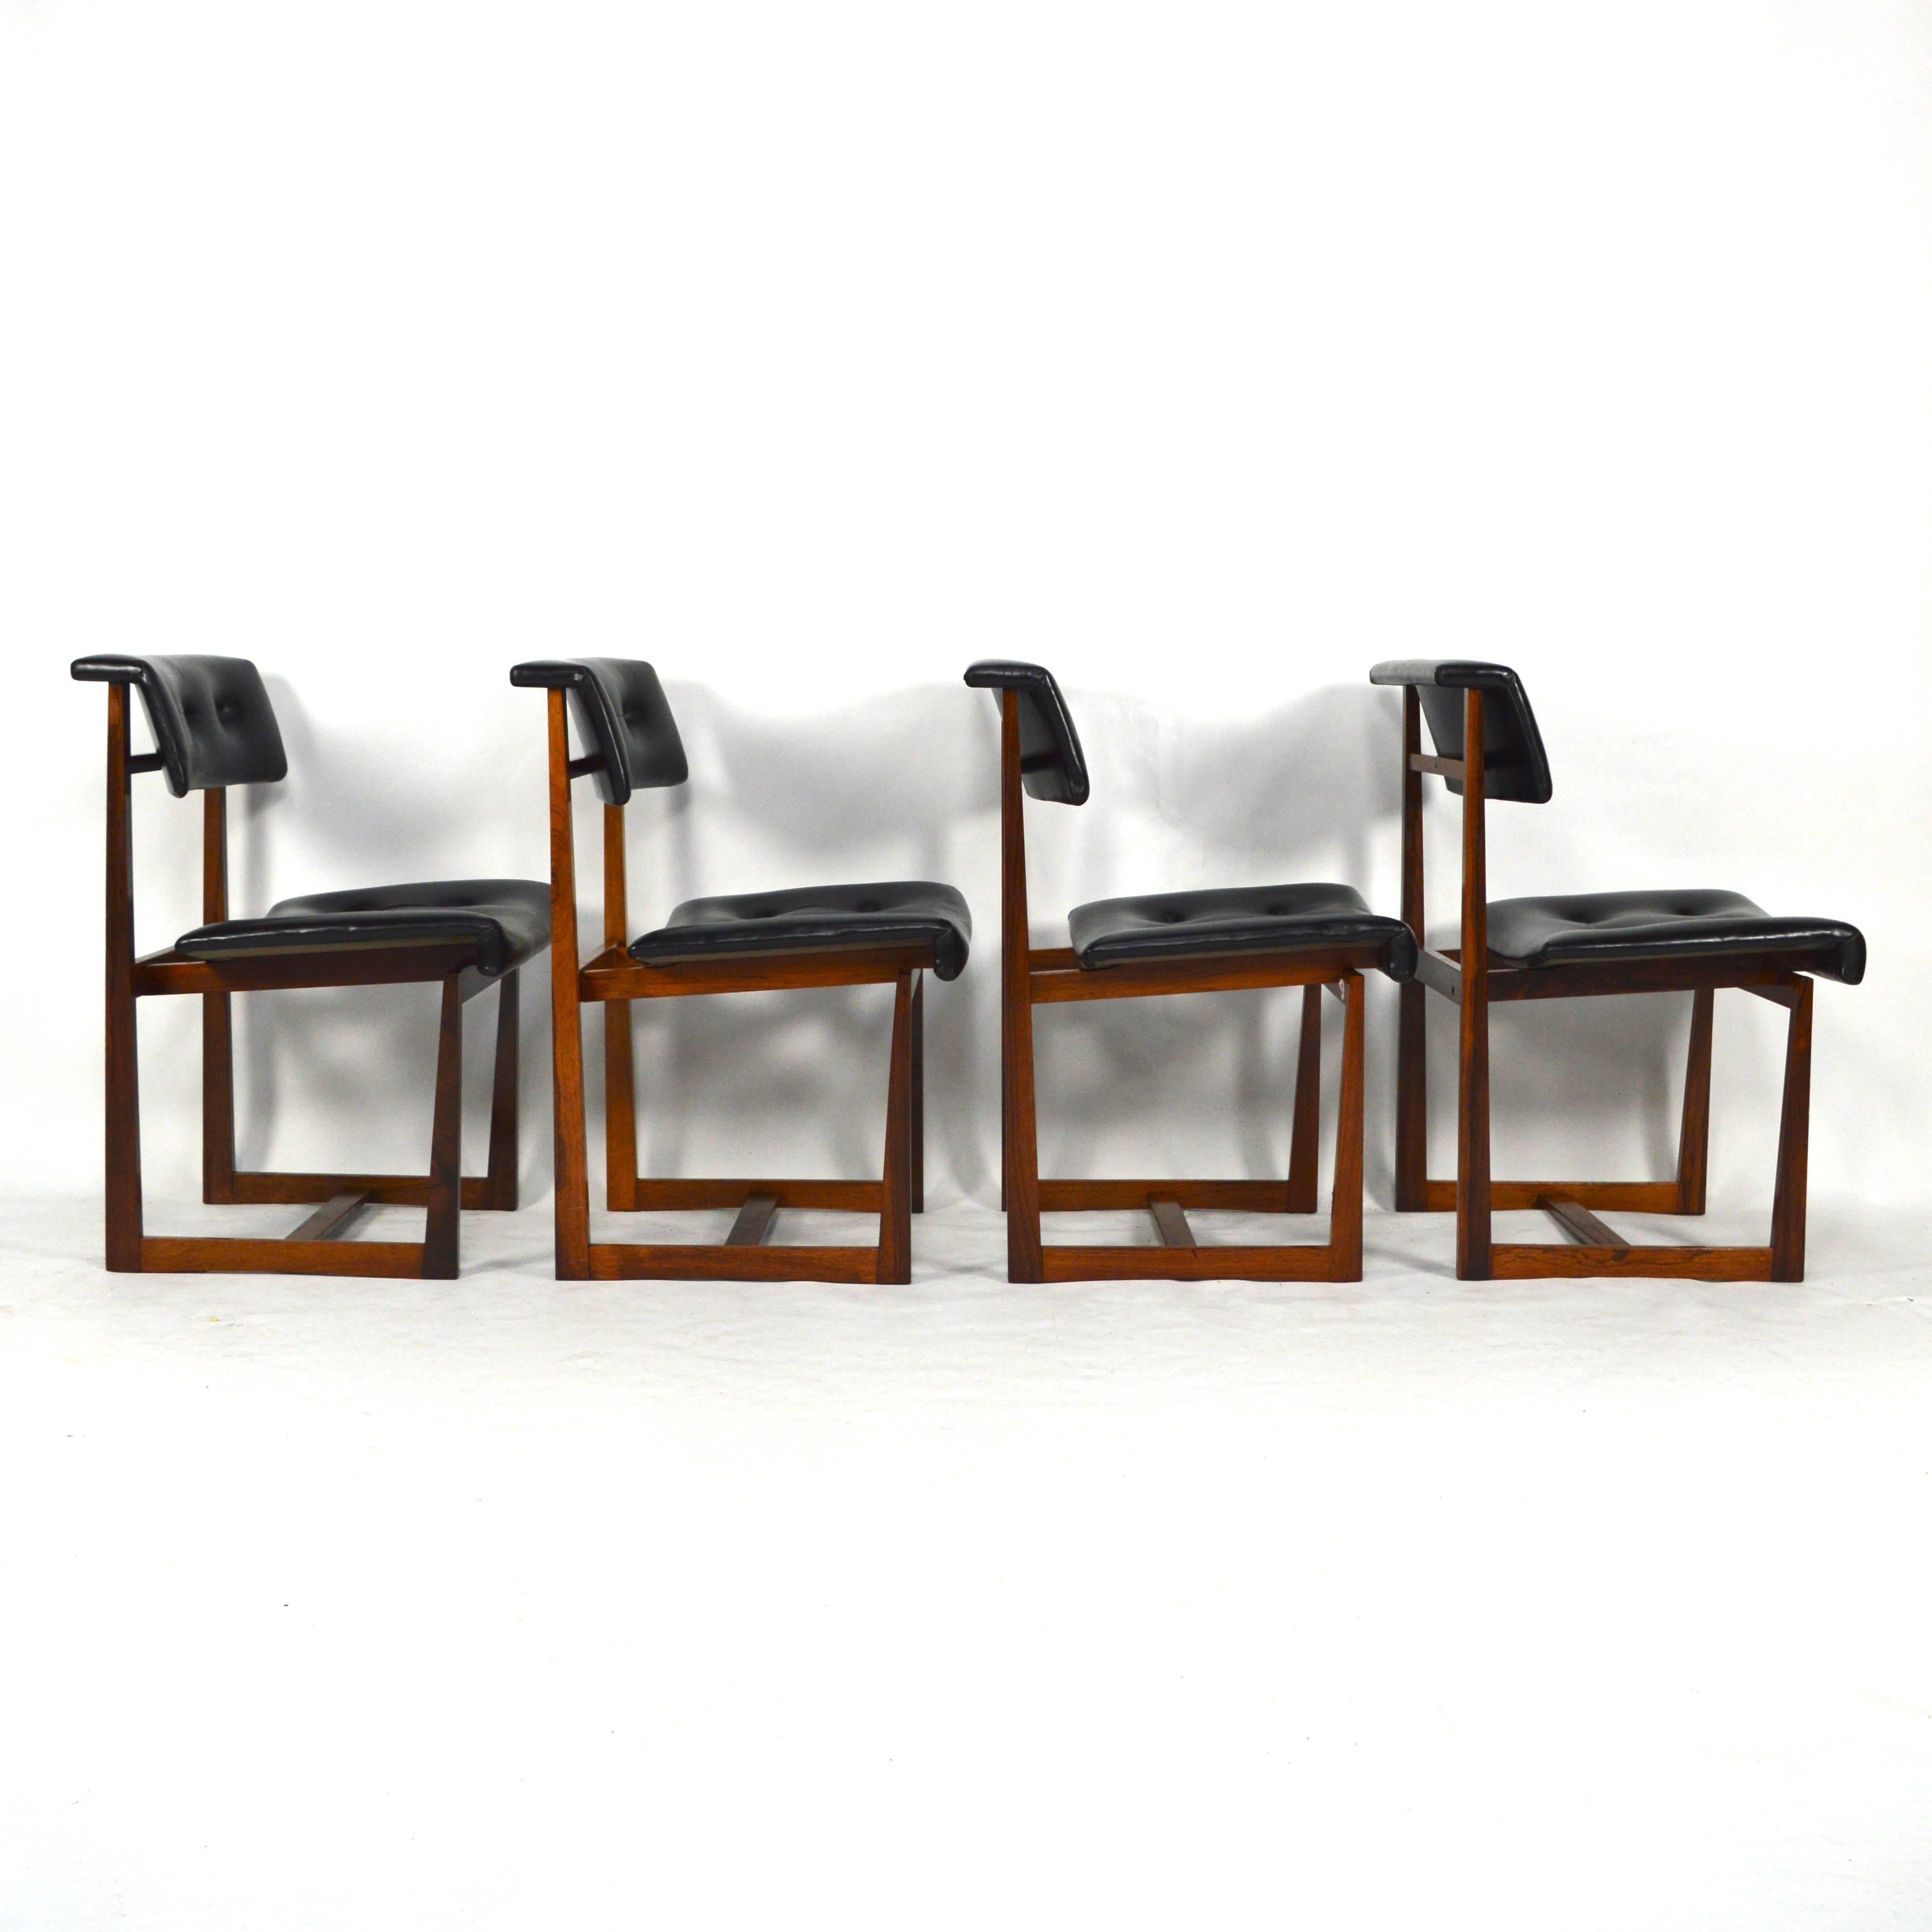 Amazing set of four Scandinavian Danish dining chairs by Henning Sørensen for Hos Dan-Ex. They are made of solid Brazilian Rosewood (Rio Palissander) and black leather. Extraordinary design with tapered legs and yet evenly squared.
In very good